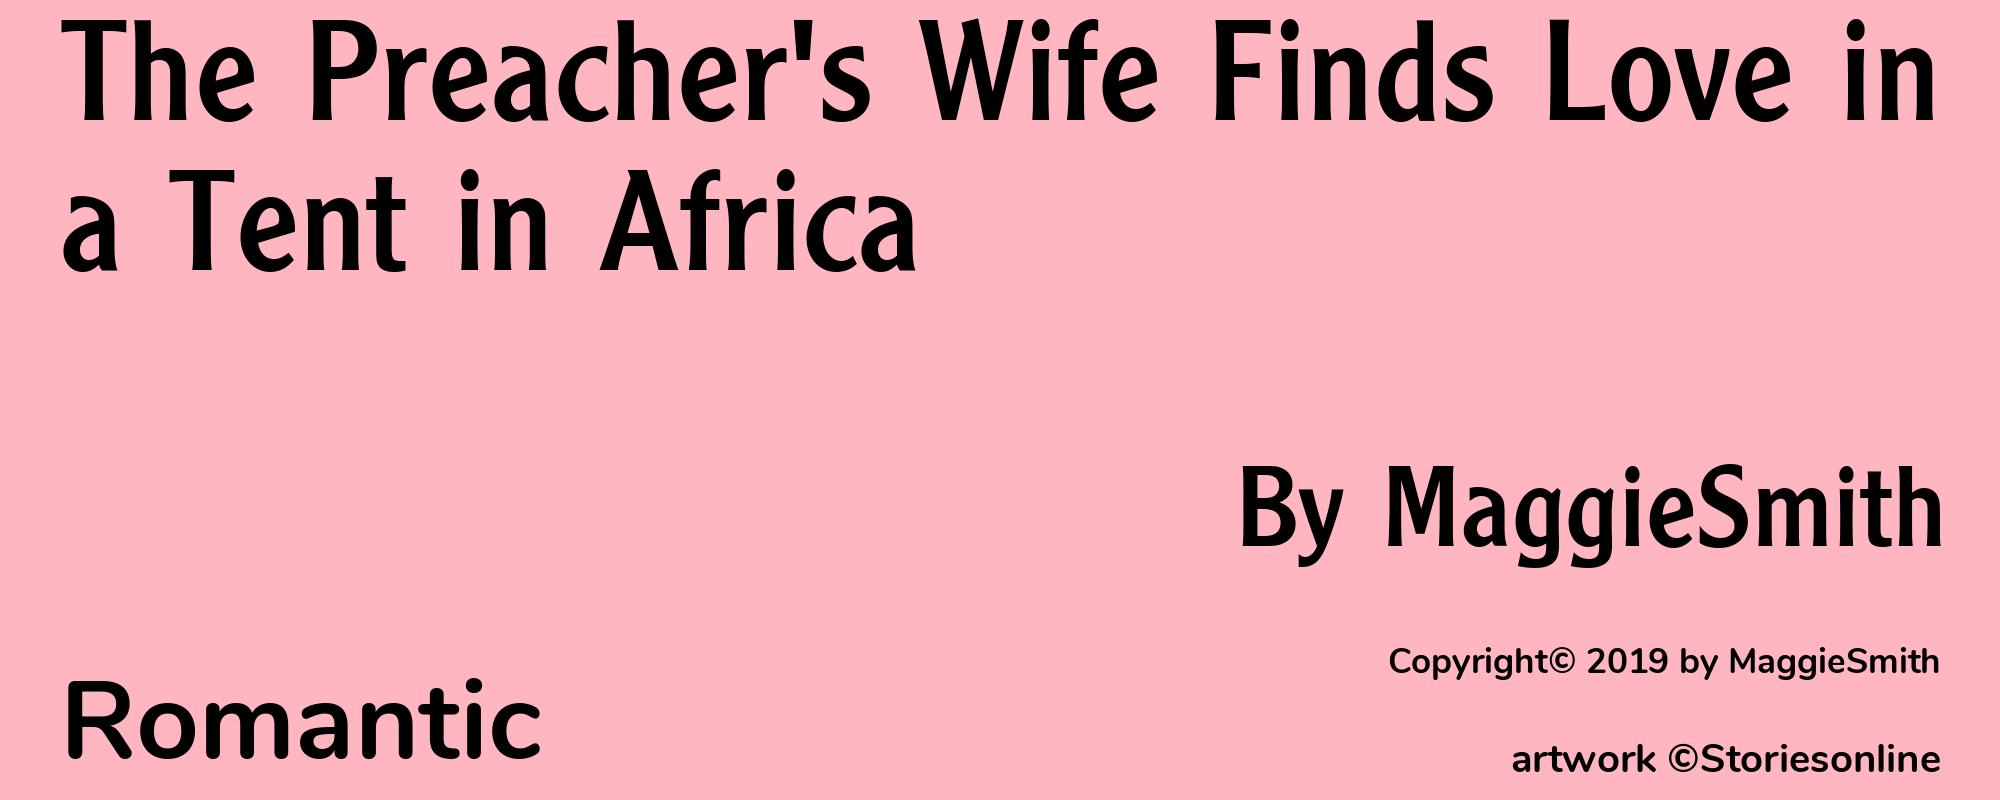 The Preacher's Wife Finds Love in a Tent in Africa - Cover